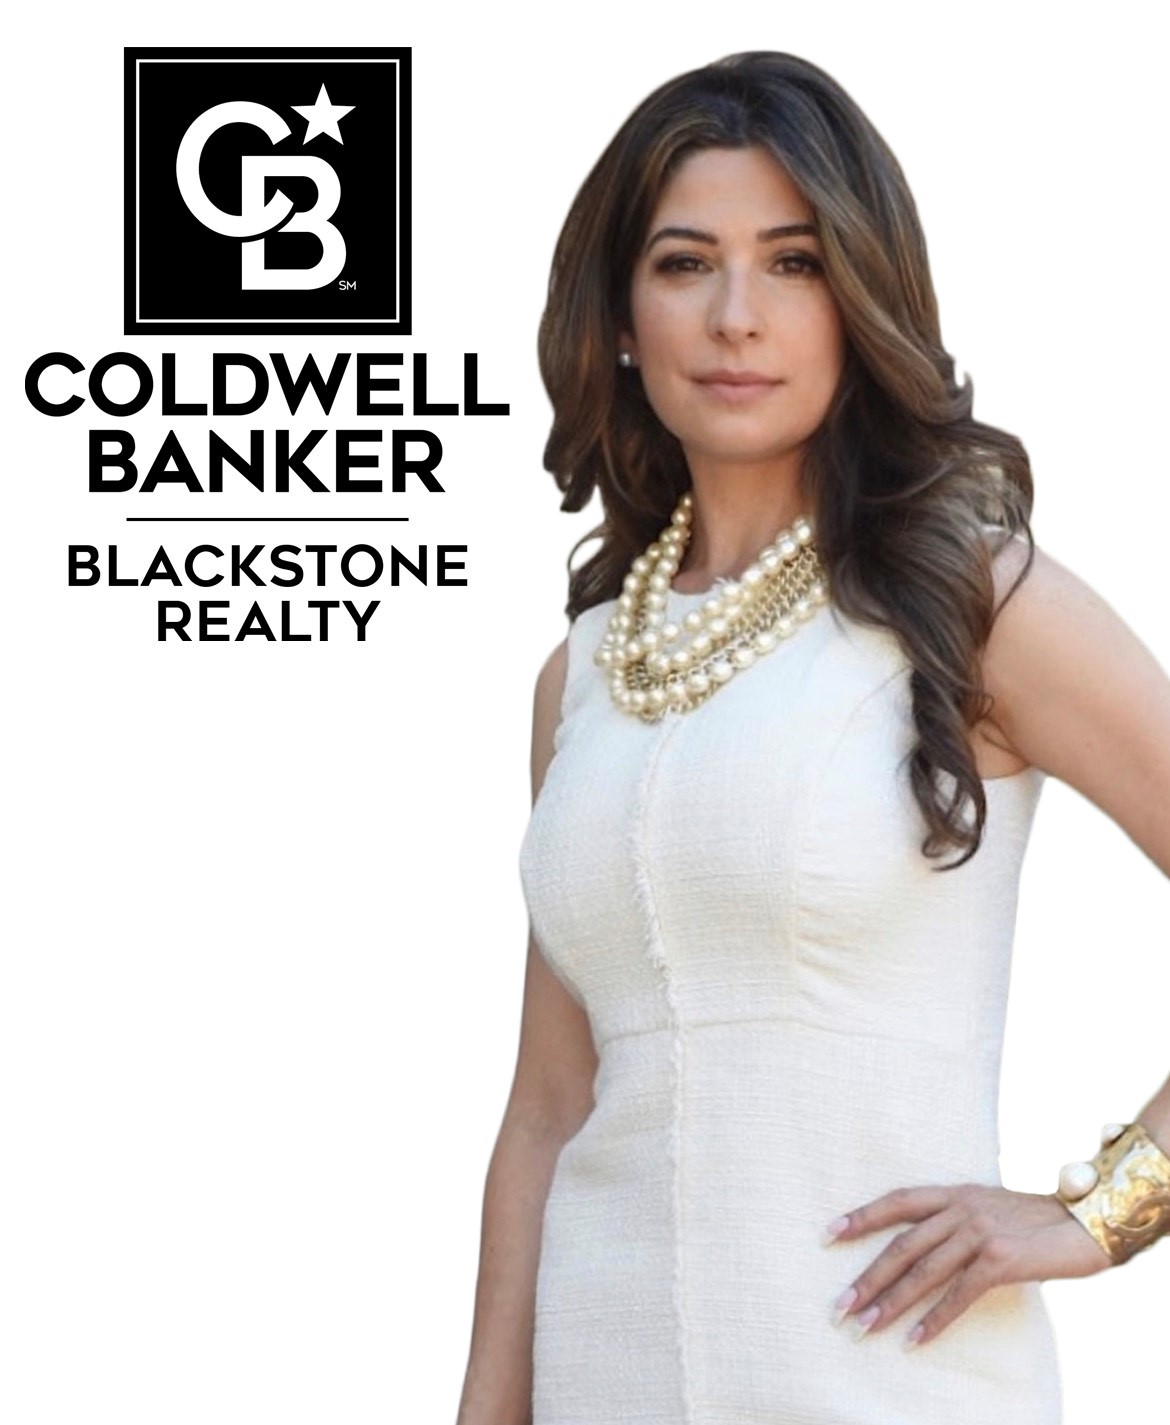 Margaux Gibson of Coldwell Banker Blackstone Realty shown in a white dress and pearls with hand on her hip